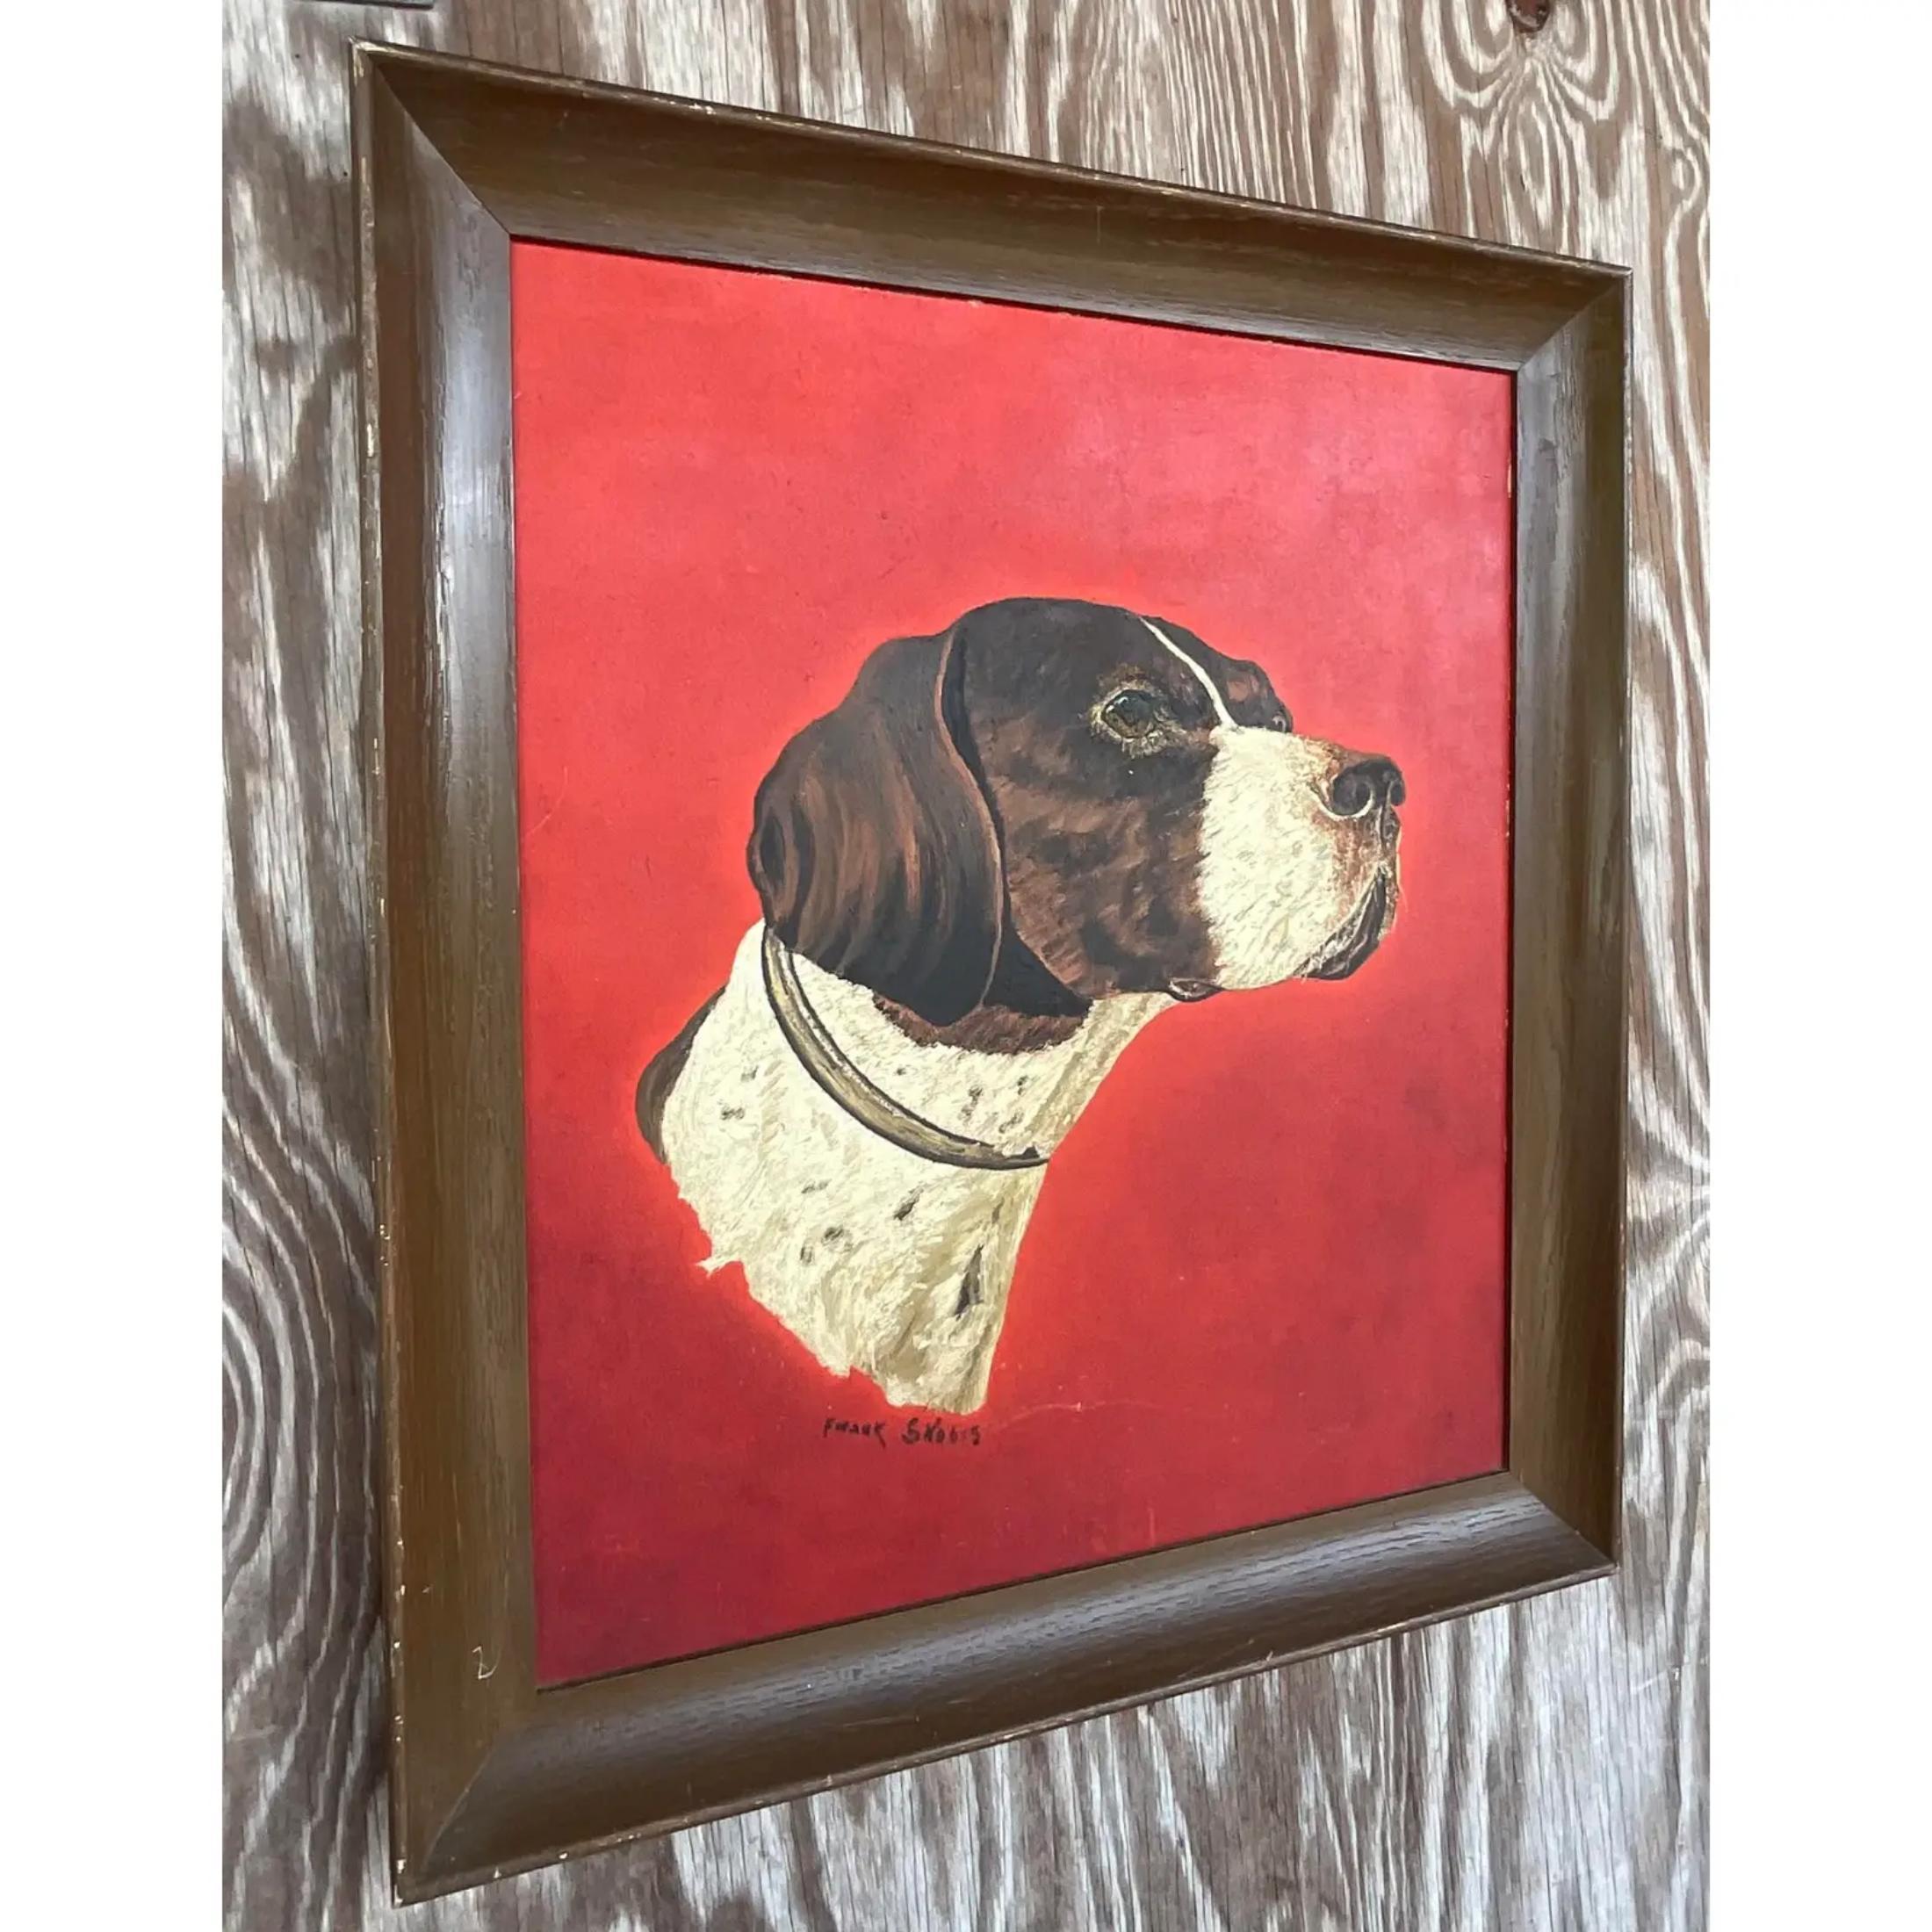 A fabulous vintage Boho original oil painting on board. A handsome dog on a bright red background. Signed by the artist. Acquired from a Palm Beach estate. 